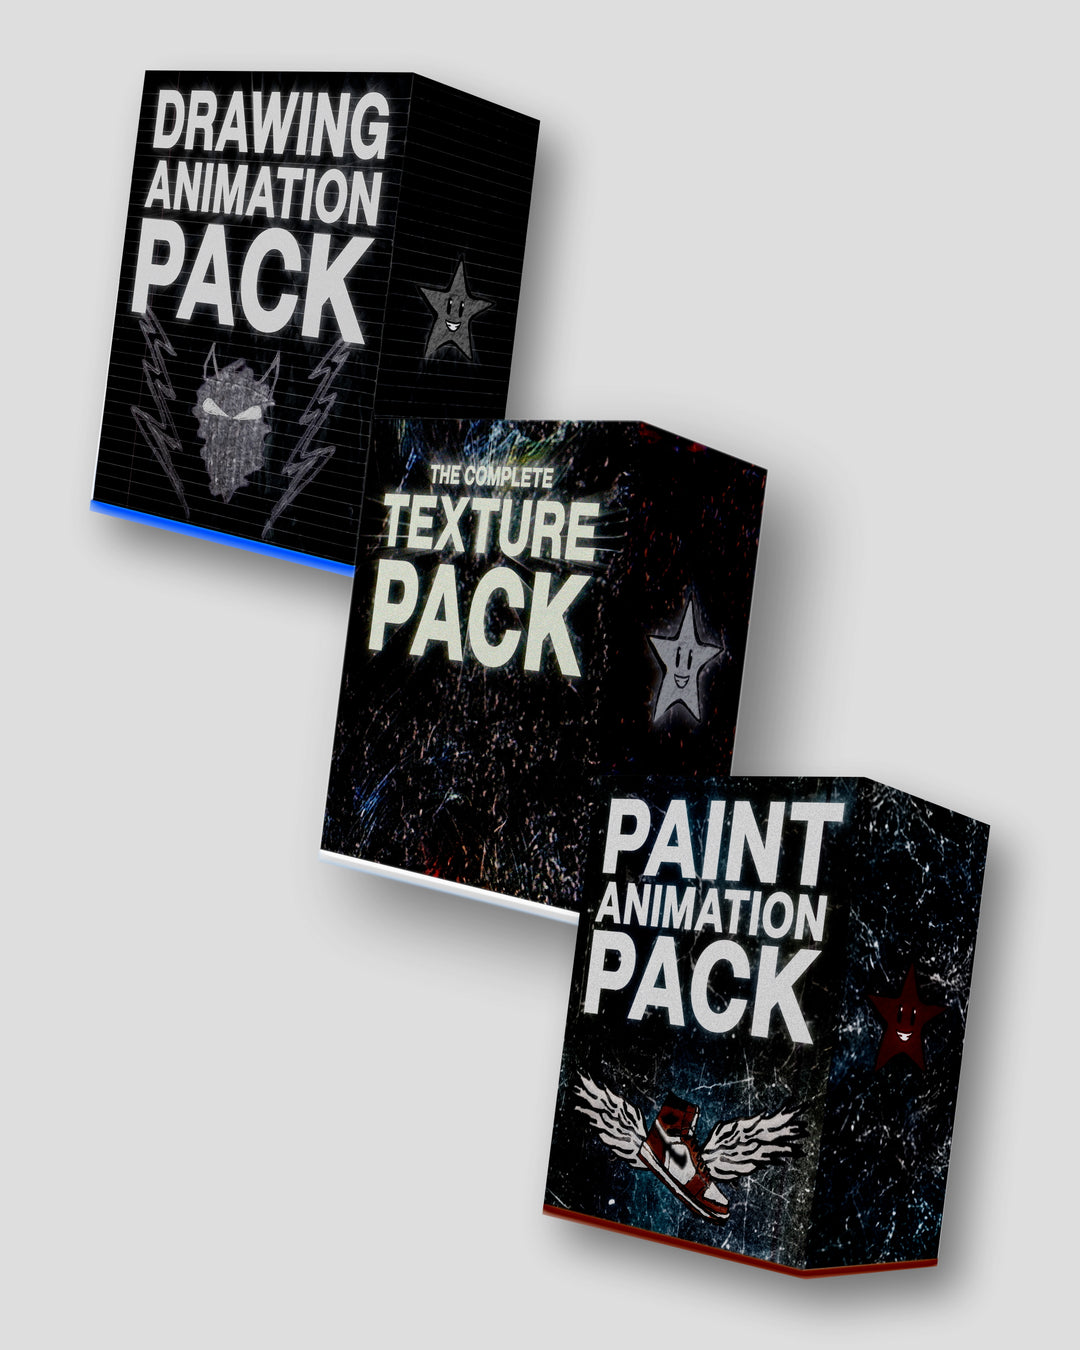 The Complete Mixed Media Bundle